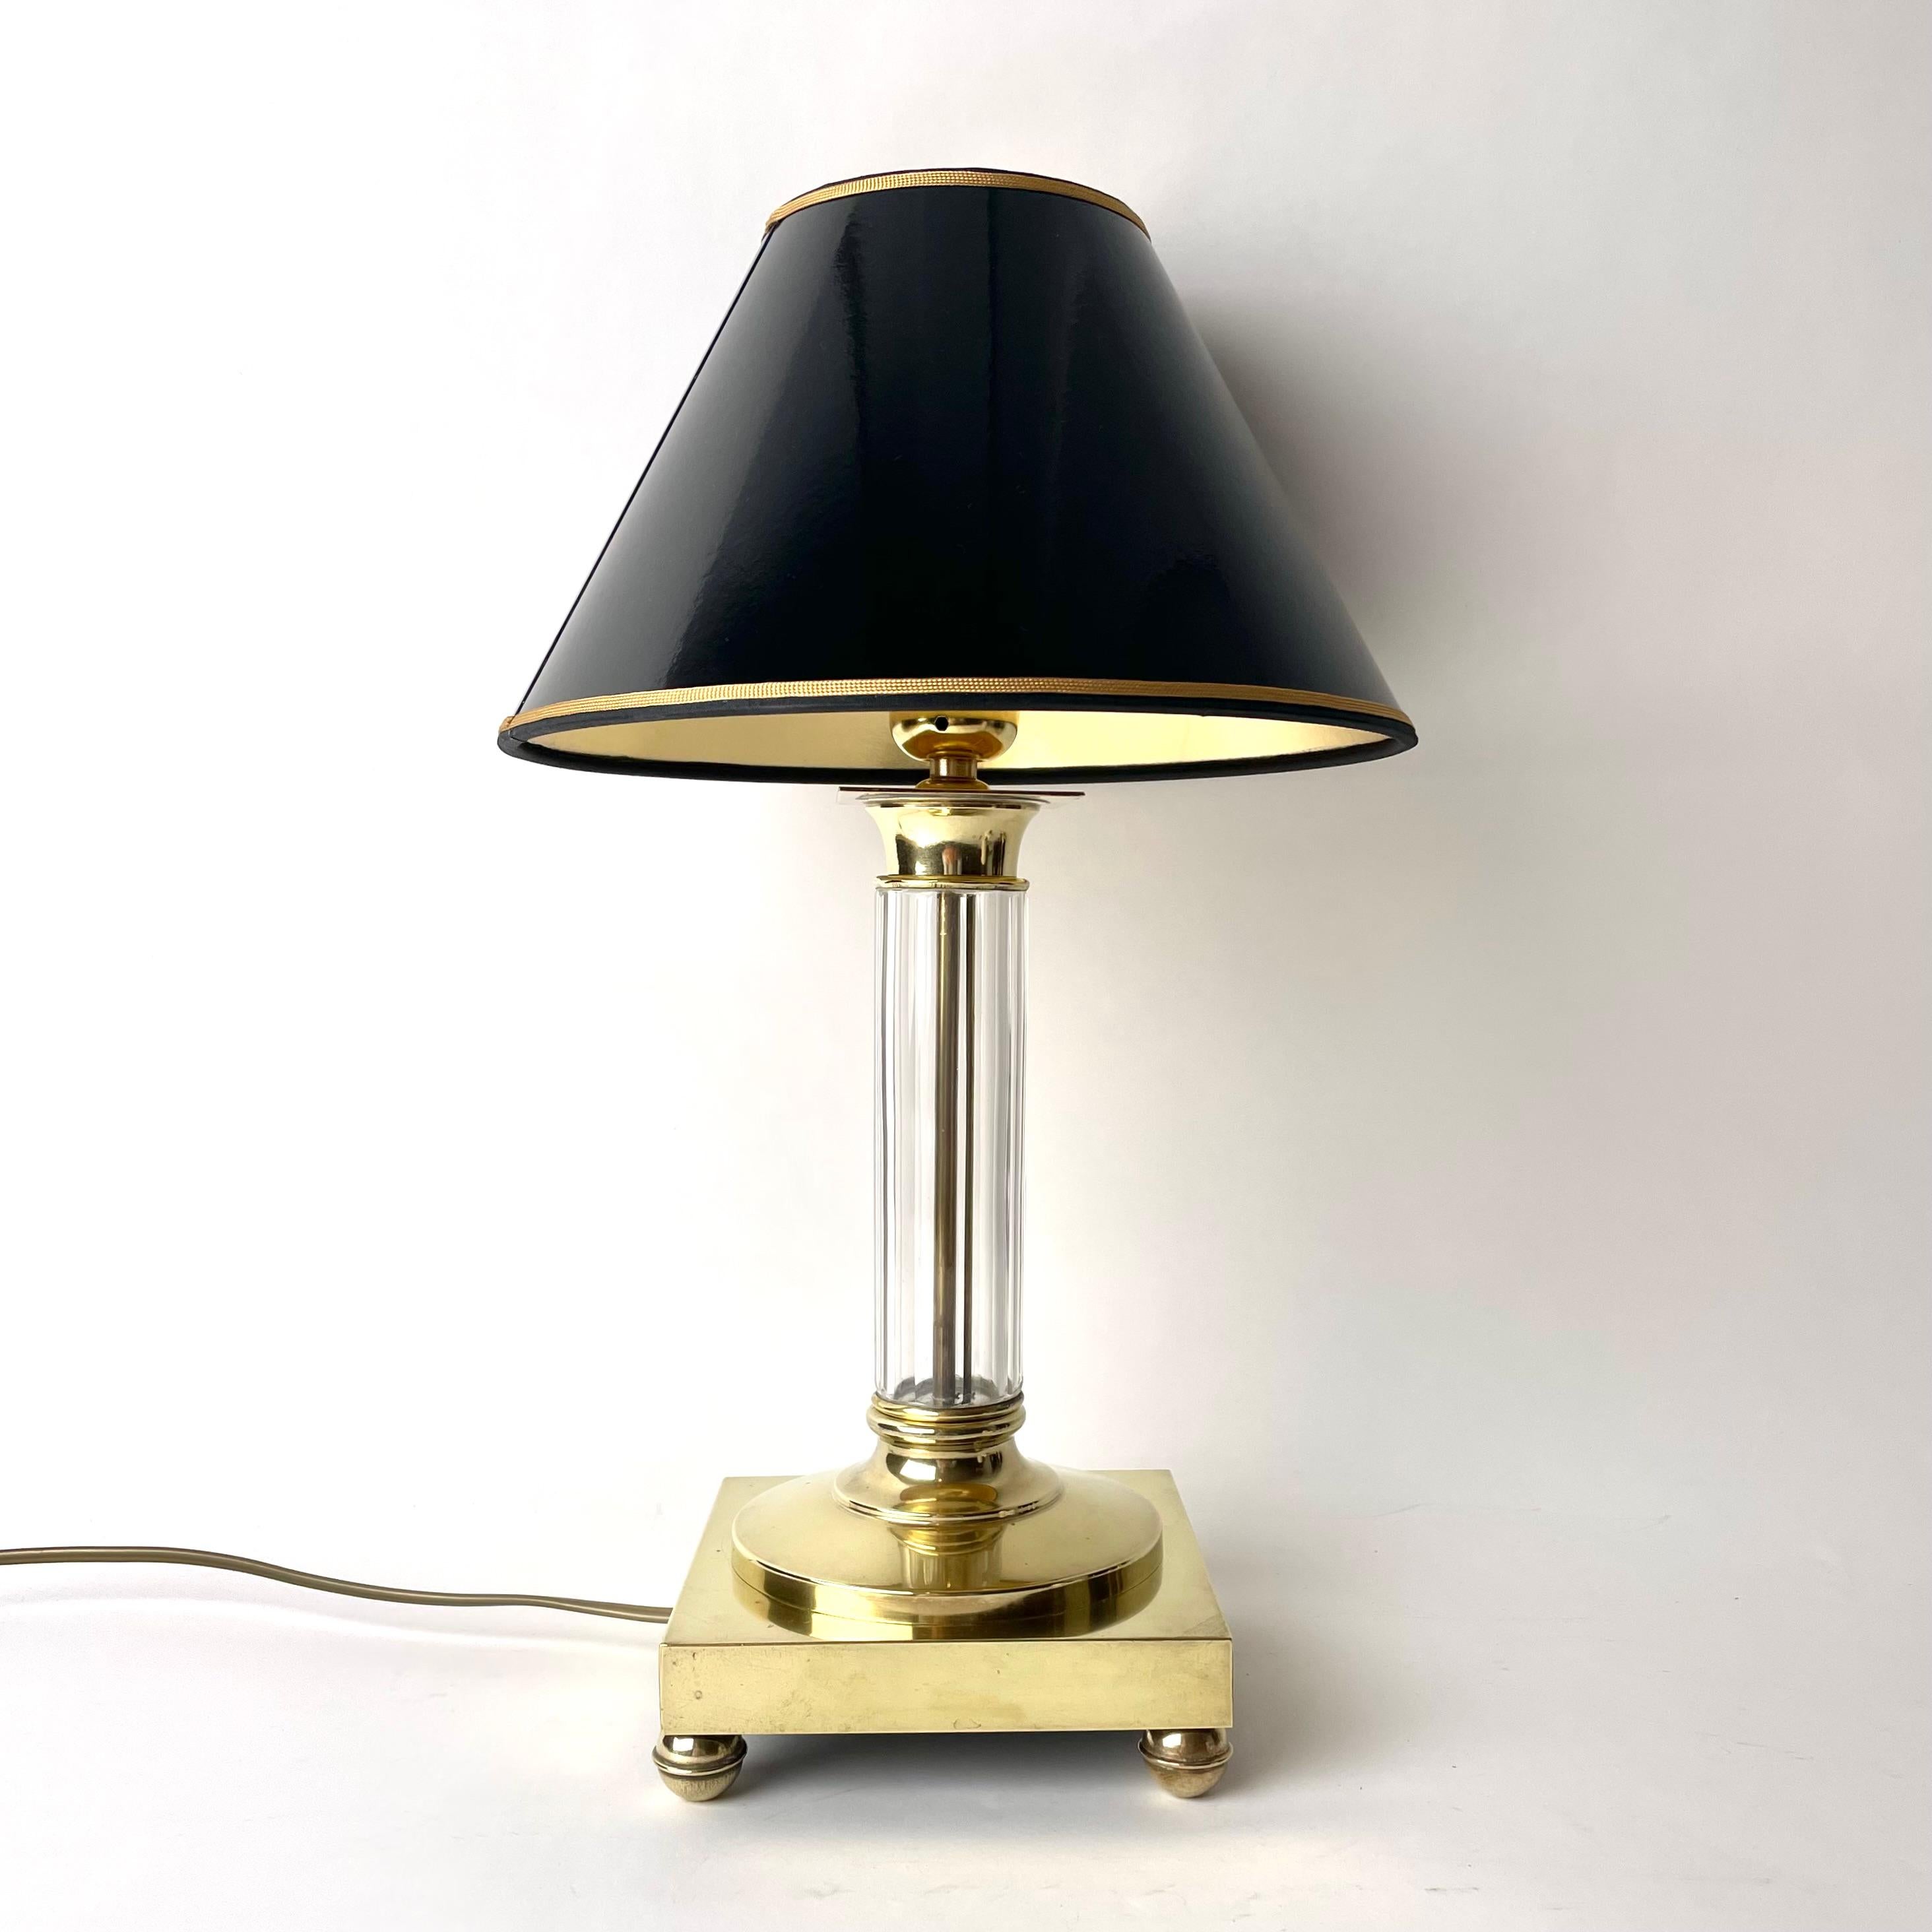 European Elegant Crystal and Brass Table Lamp, Early 20th Century For Sale